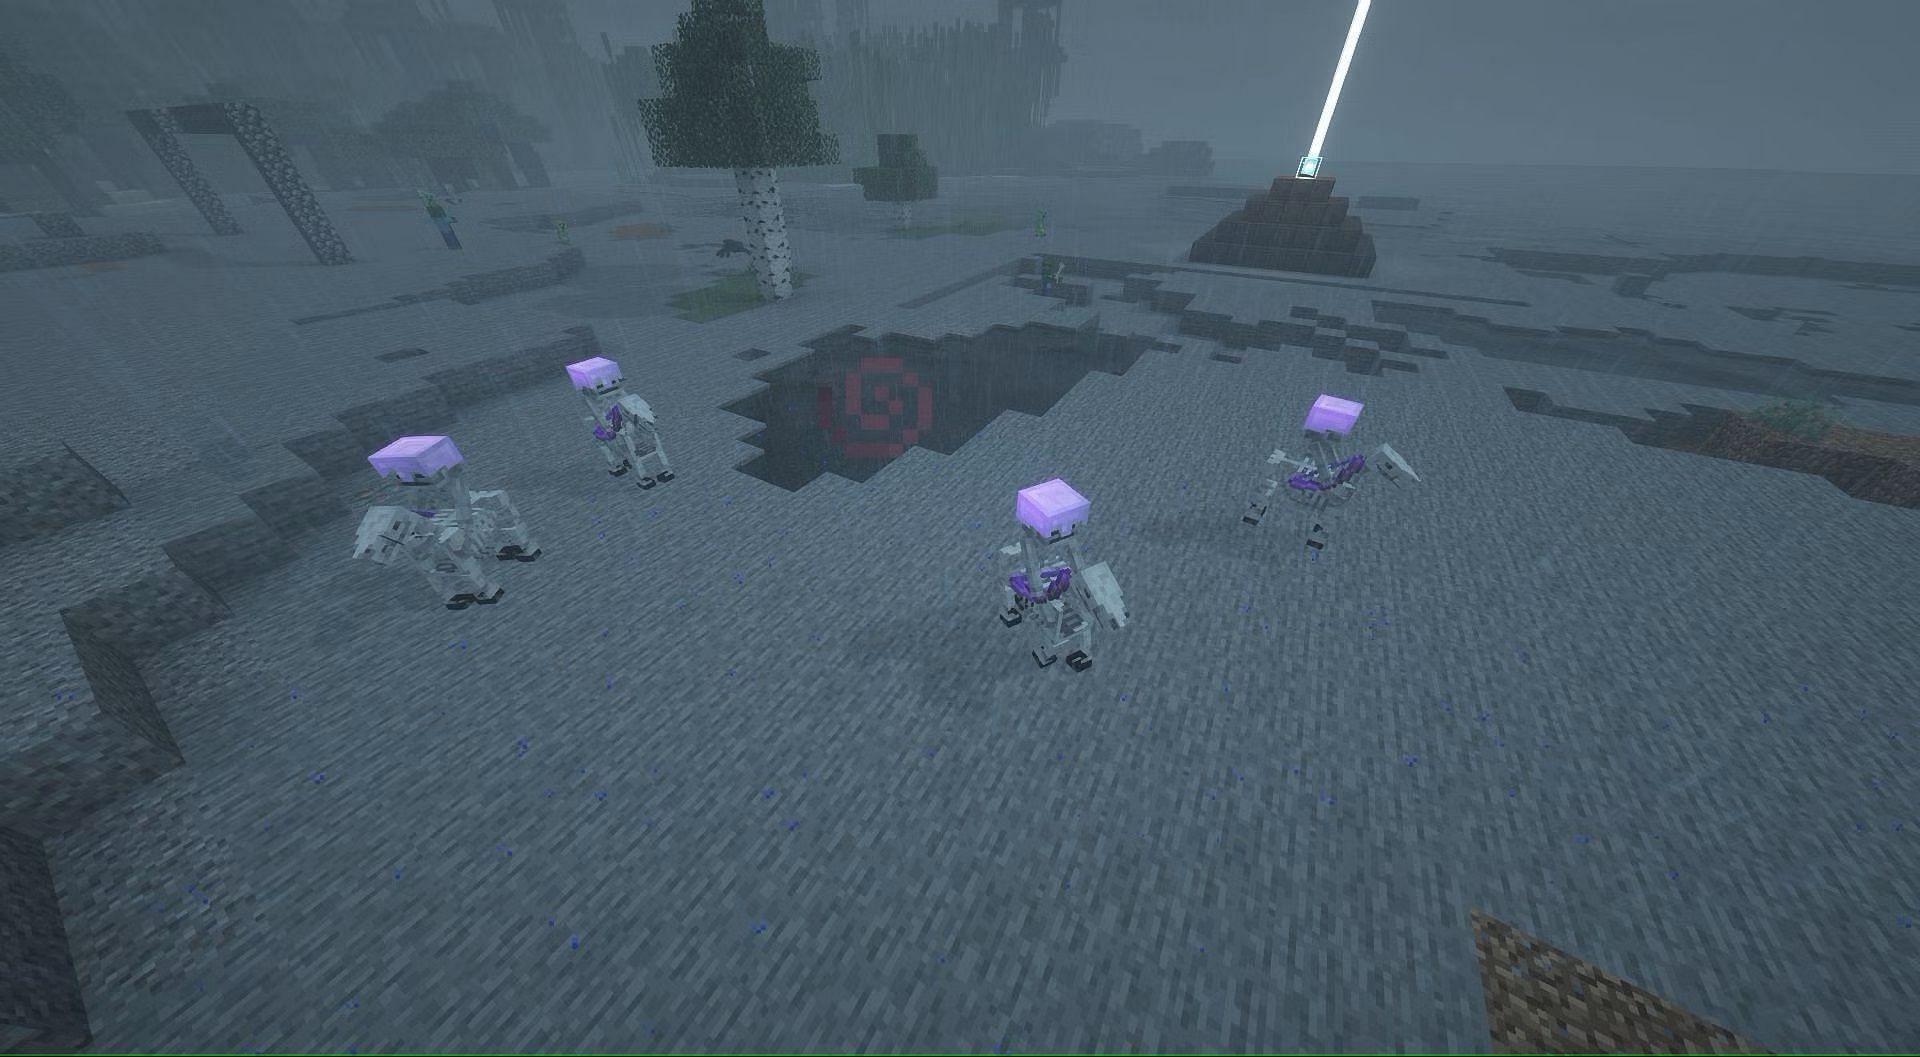 Skeleton horse spawns during thunderstorms and starts skeleton trap in Minecraft (Image via Mojang)